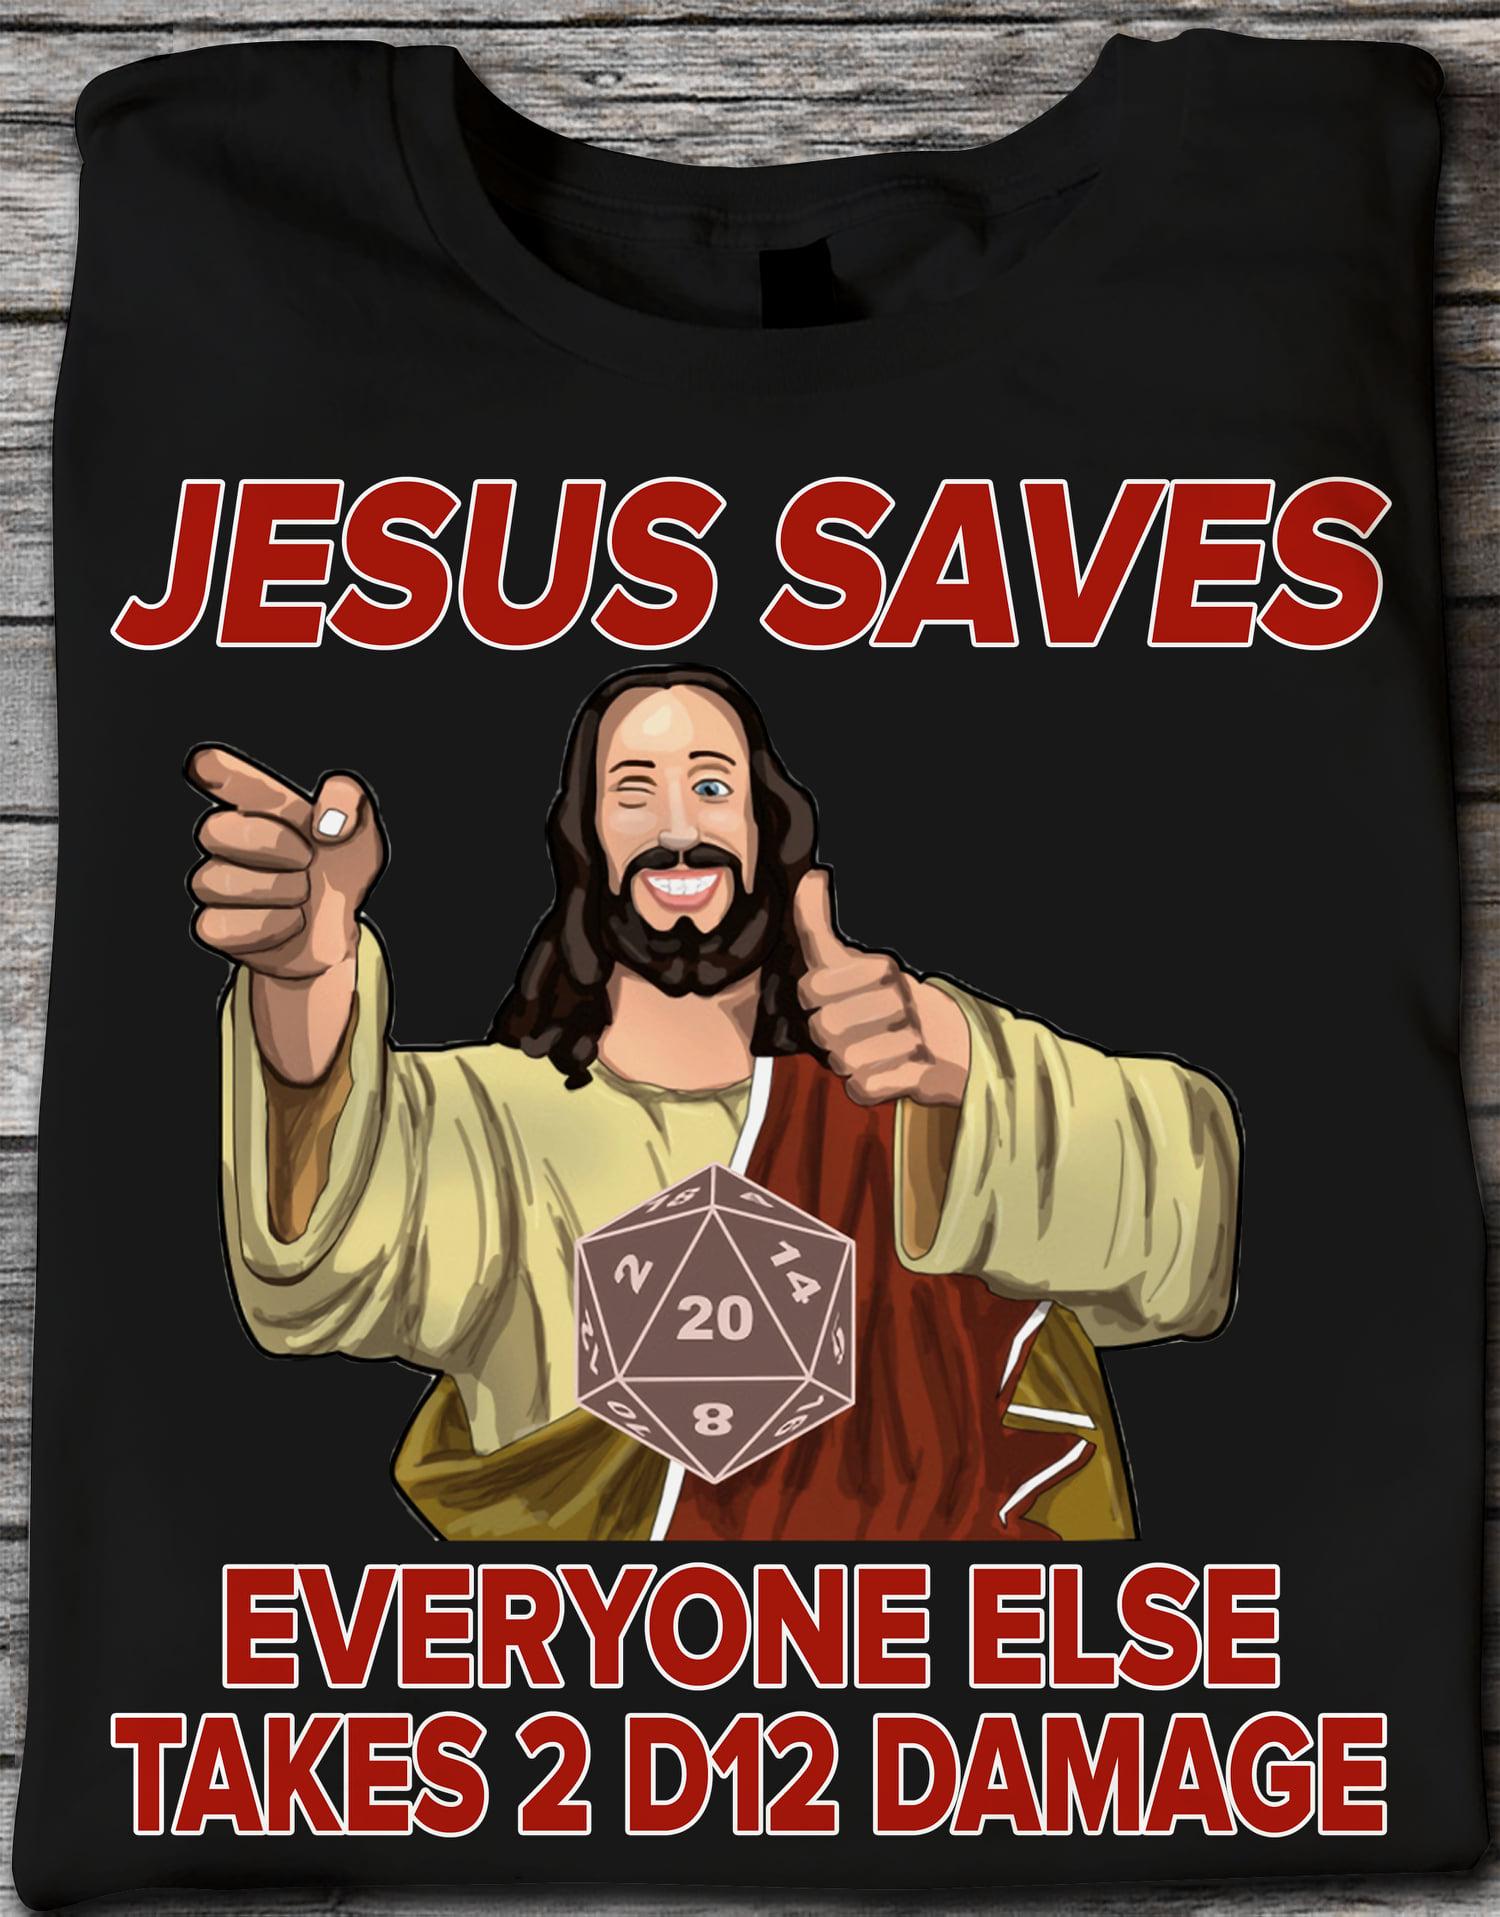 Jesus saves everyone else takes 2 D12 damage - Jesus and dices, Dungeons and Dragons